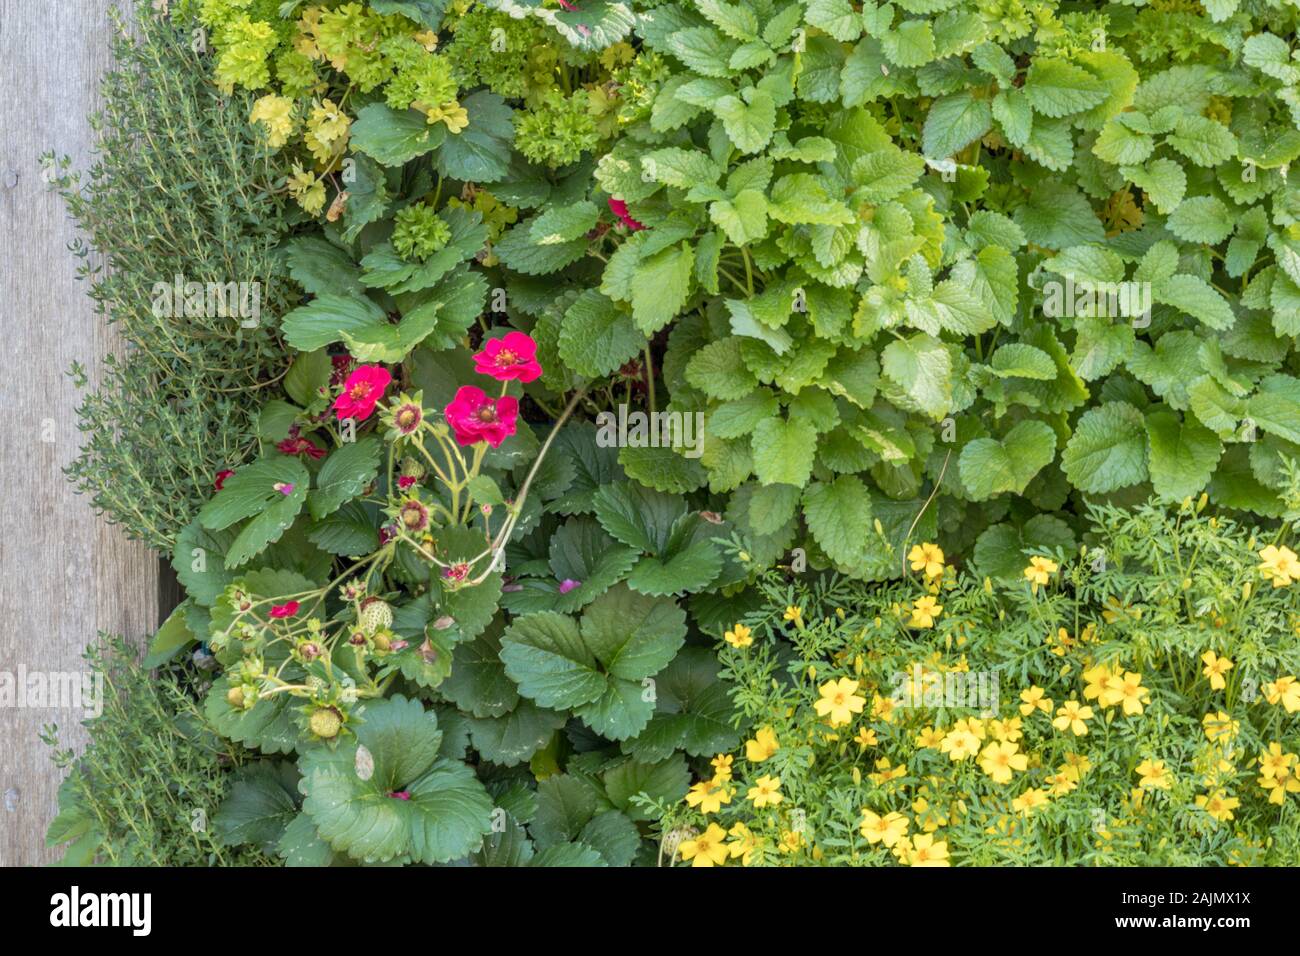 Vertical garden containing vibrant green annuals and flowering plants.  Alternative gardening concept. Stock Photo